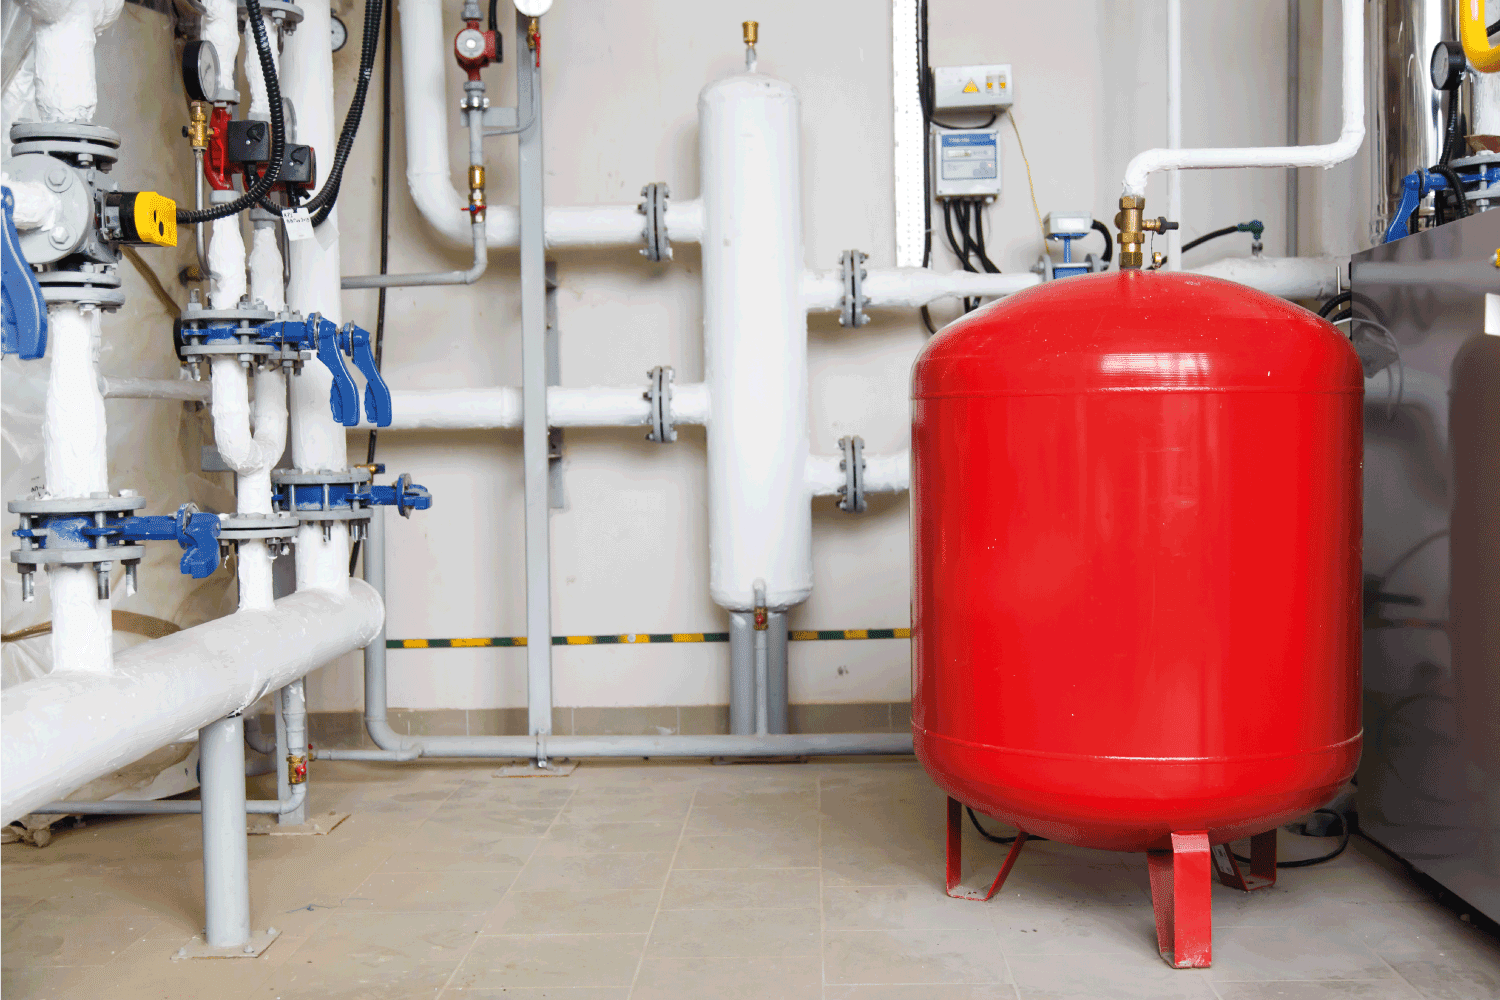 red expansion tank in a heating system